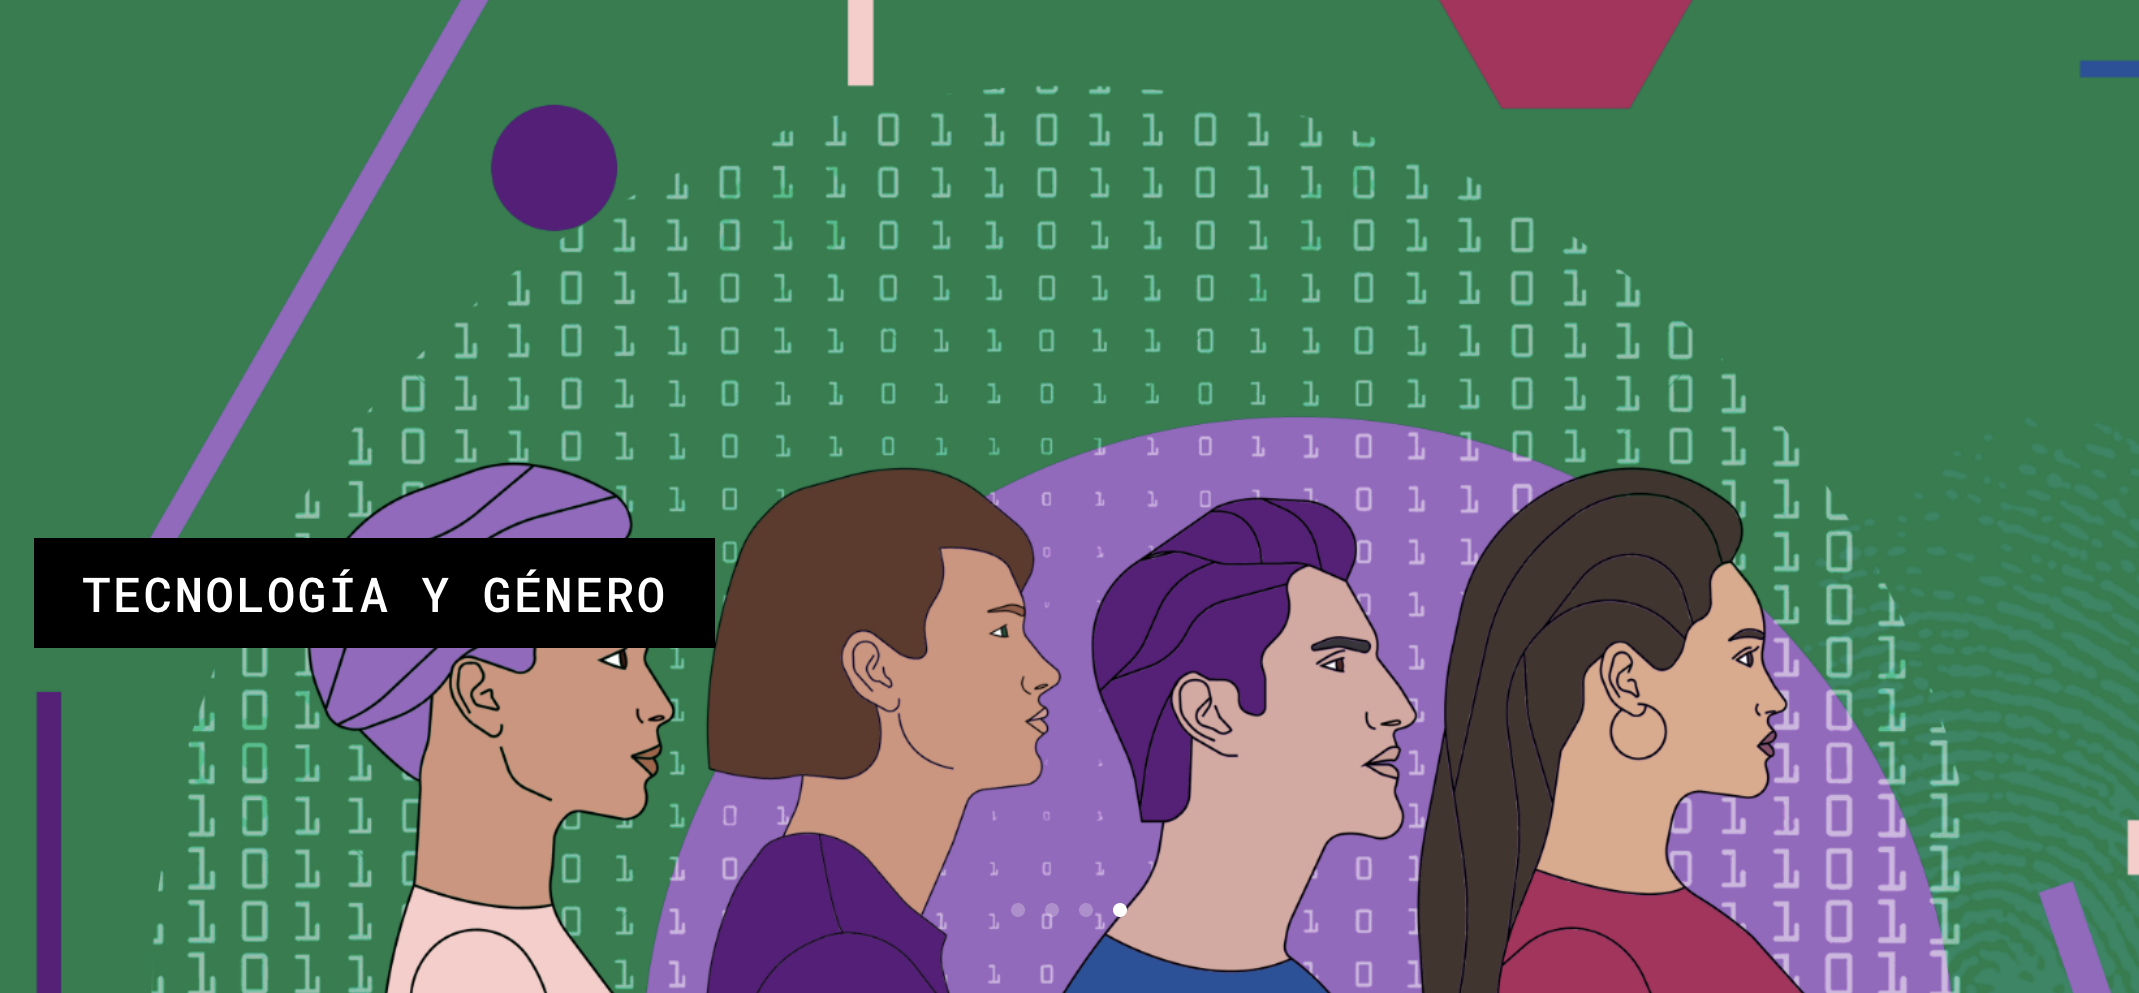 Graphic illustration showing the side profiles of four different people in various skin tones and hair colors standing in a line. Behind is an abstract green wallpaper with geometric patterns and a large circle of white binary code.